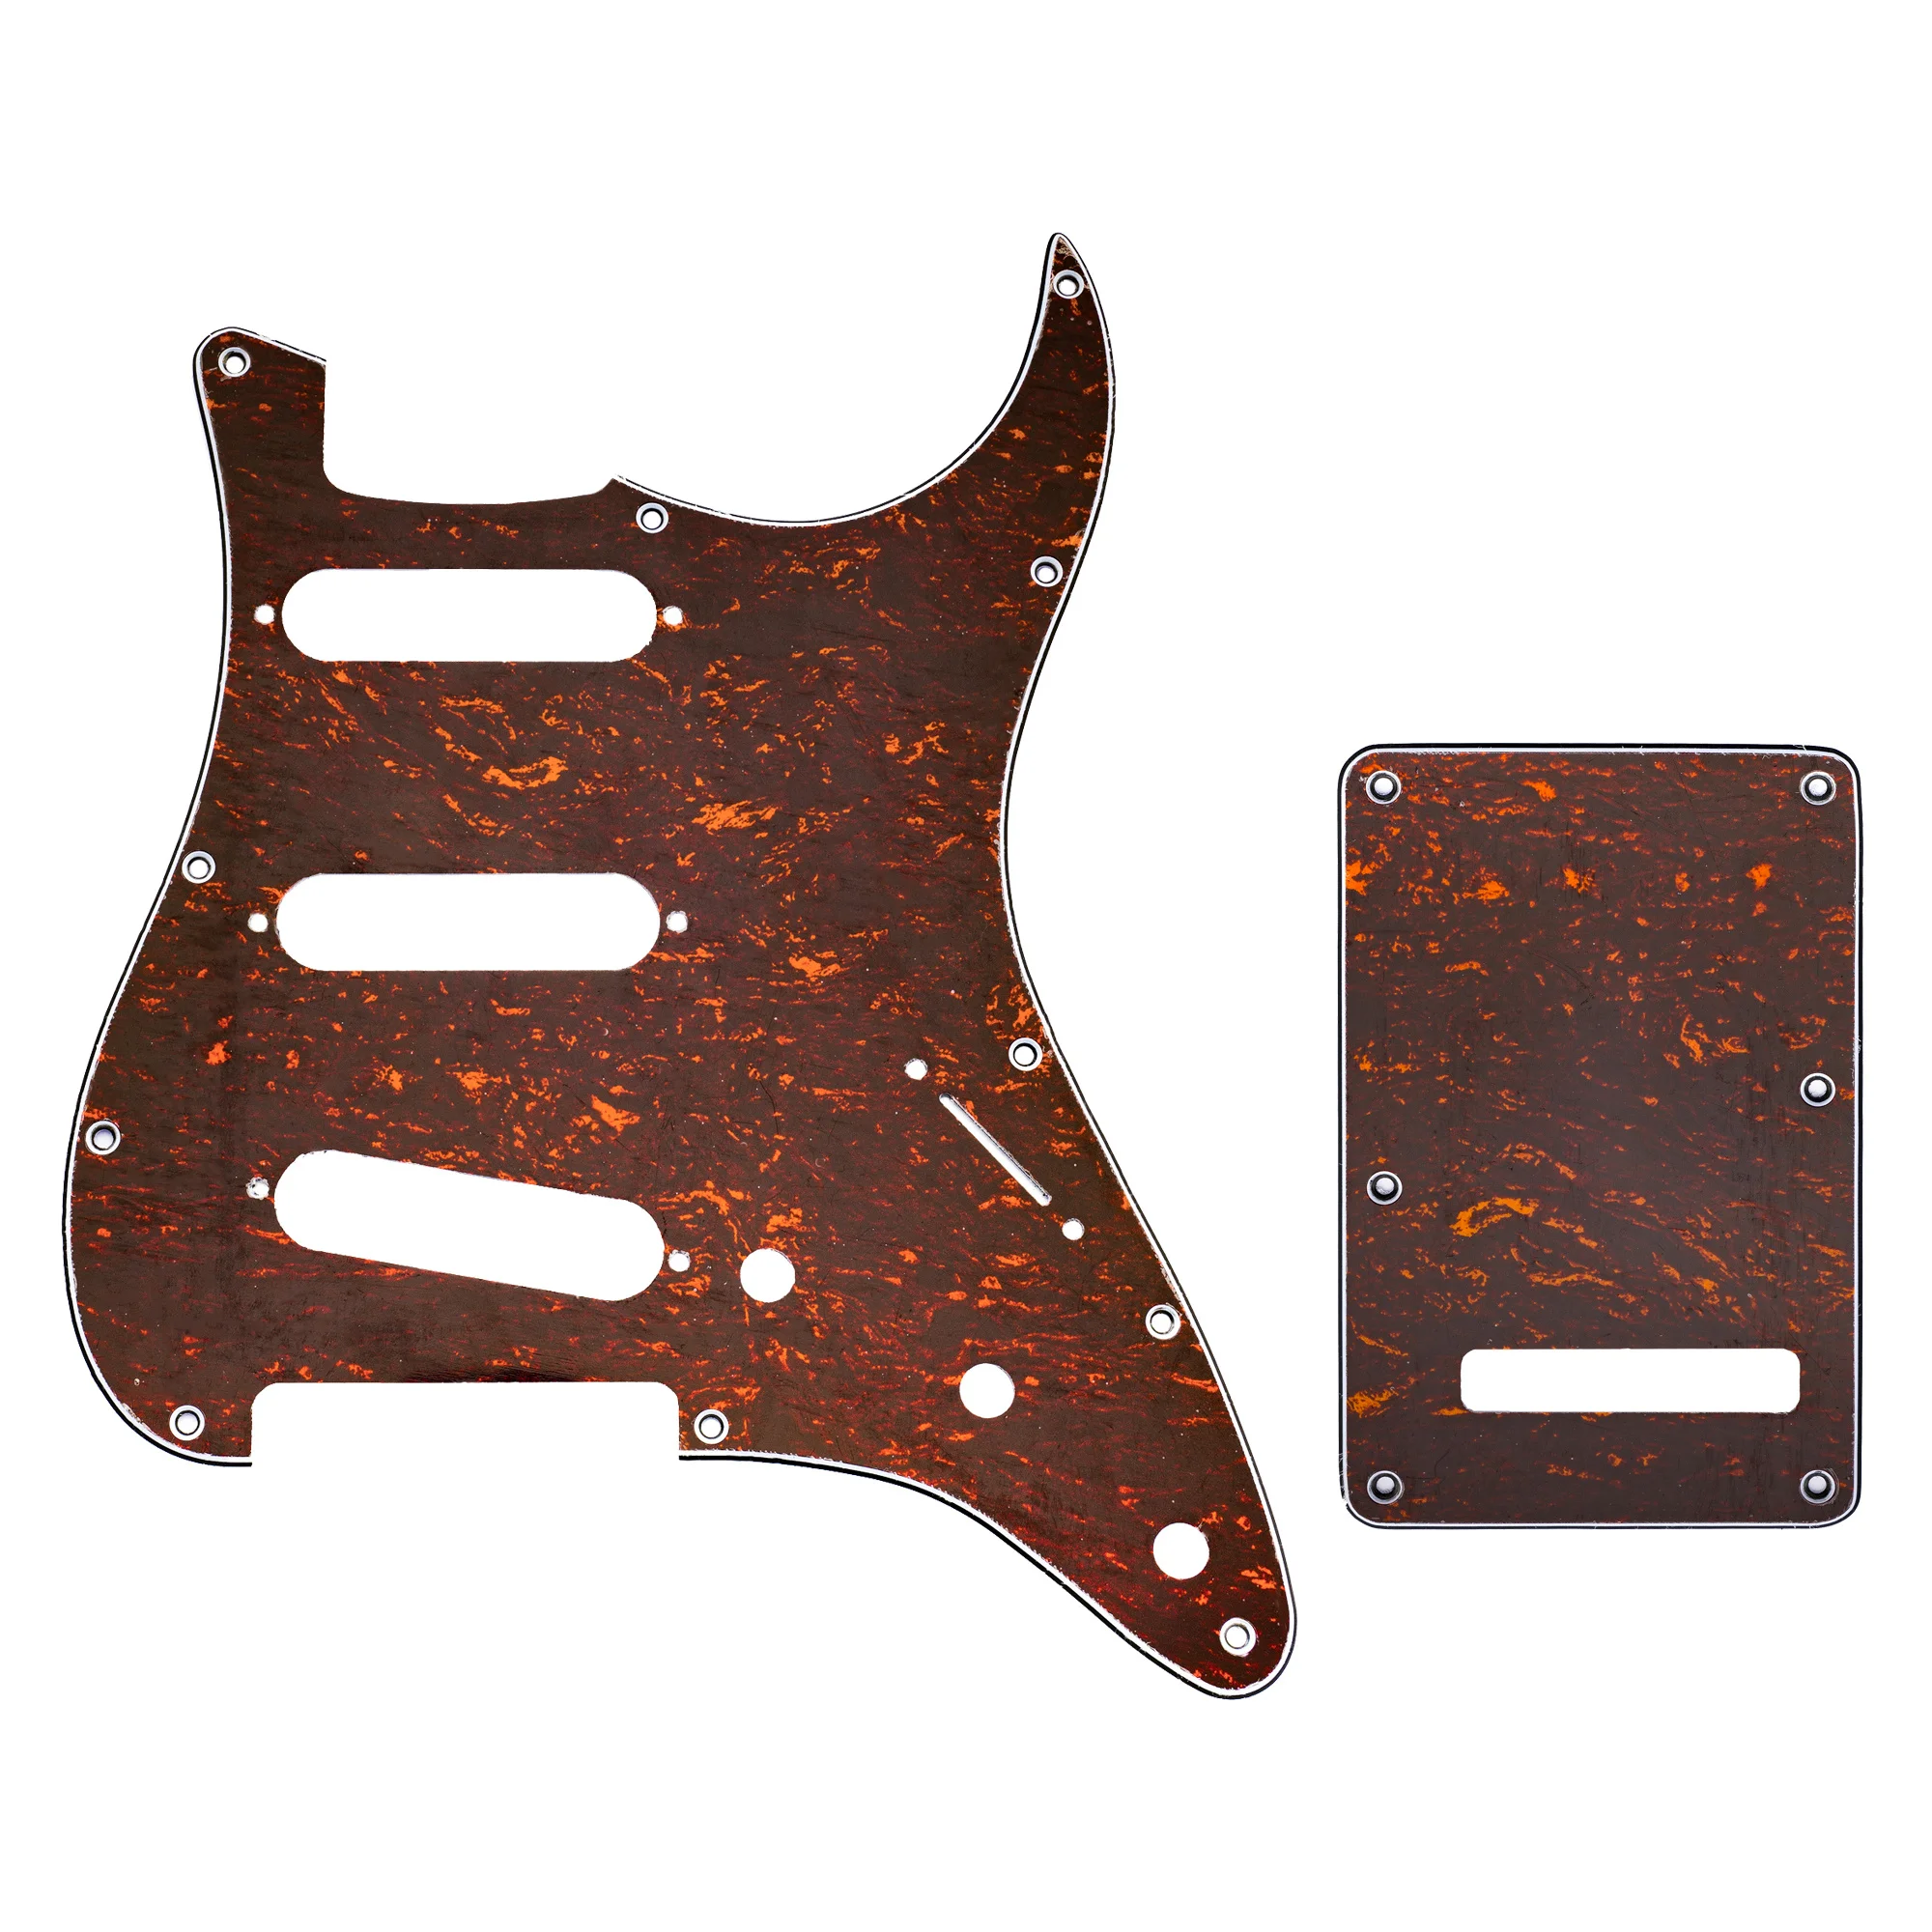 

Musiclily SSS 11 Hole Strat Guitar Pickguard and BackPlate Set for Fender USA/Mexican Standard Stratocaster, 4Ply Red Tortoise